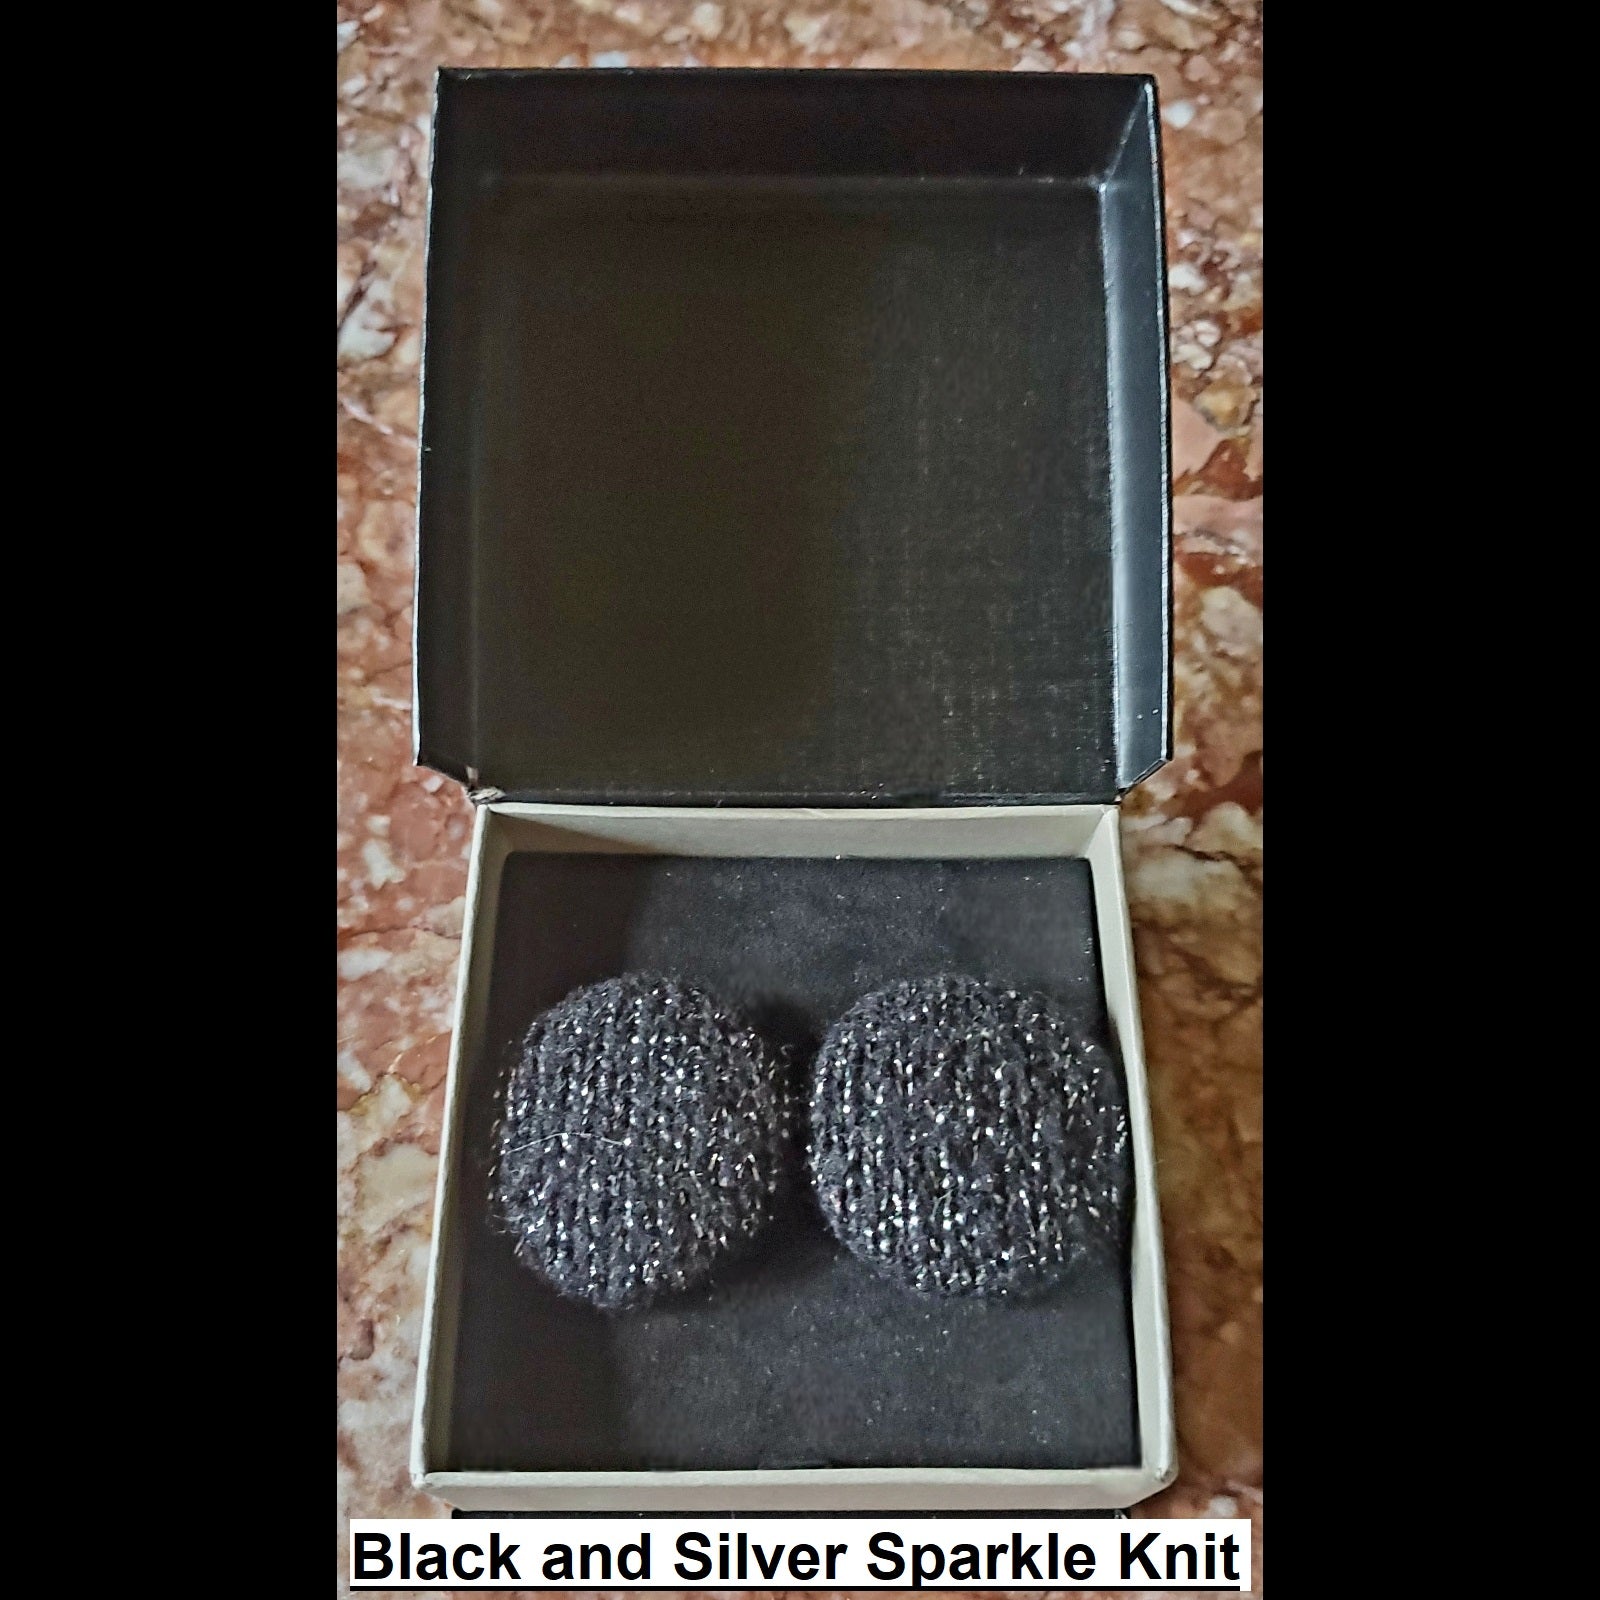 black and silver sparkle knit button earrings in jewelry box